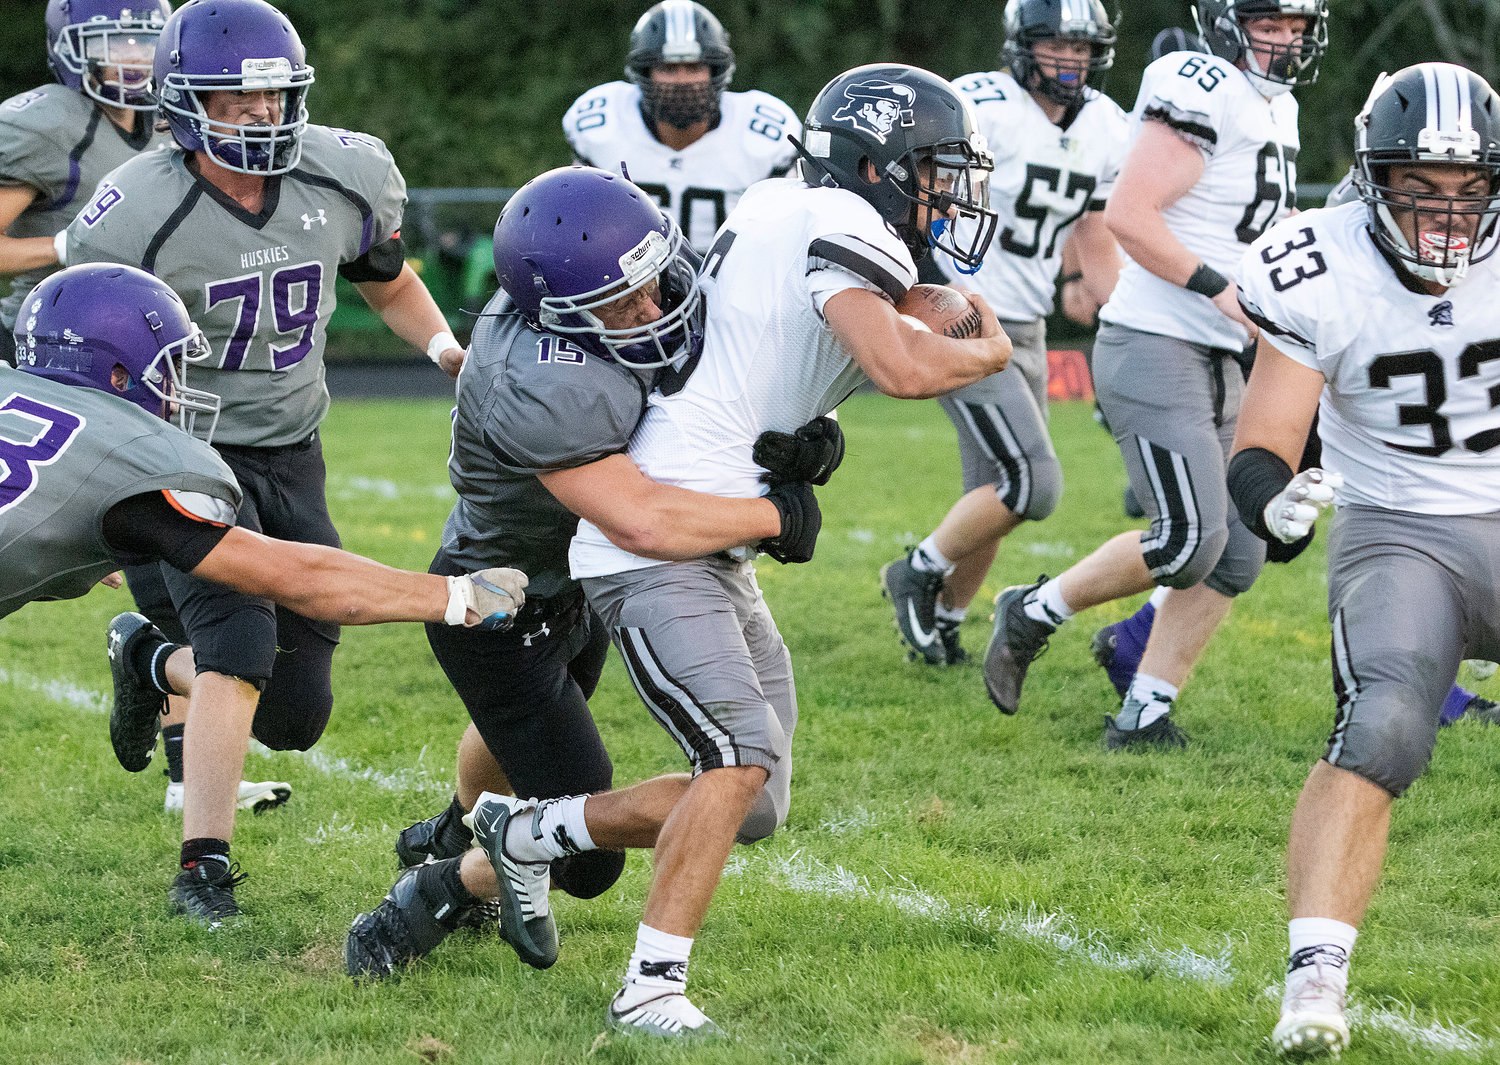 Middle linebacker James Thibaudeau makes one of his team high twelve tackles during the game.